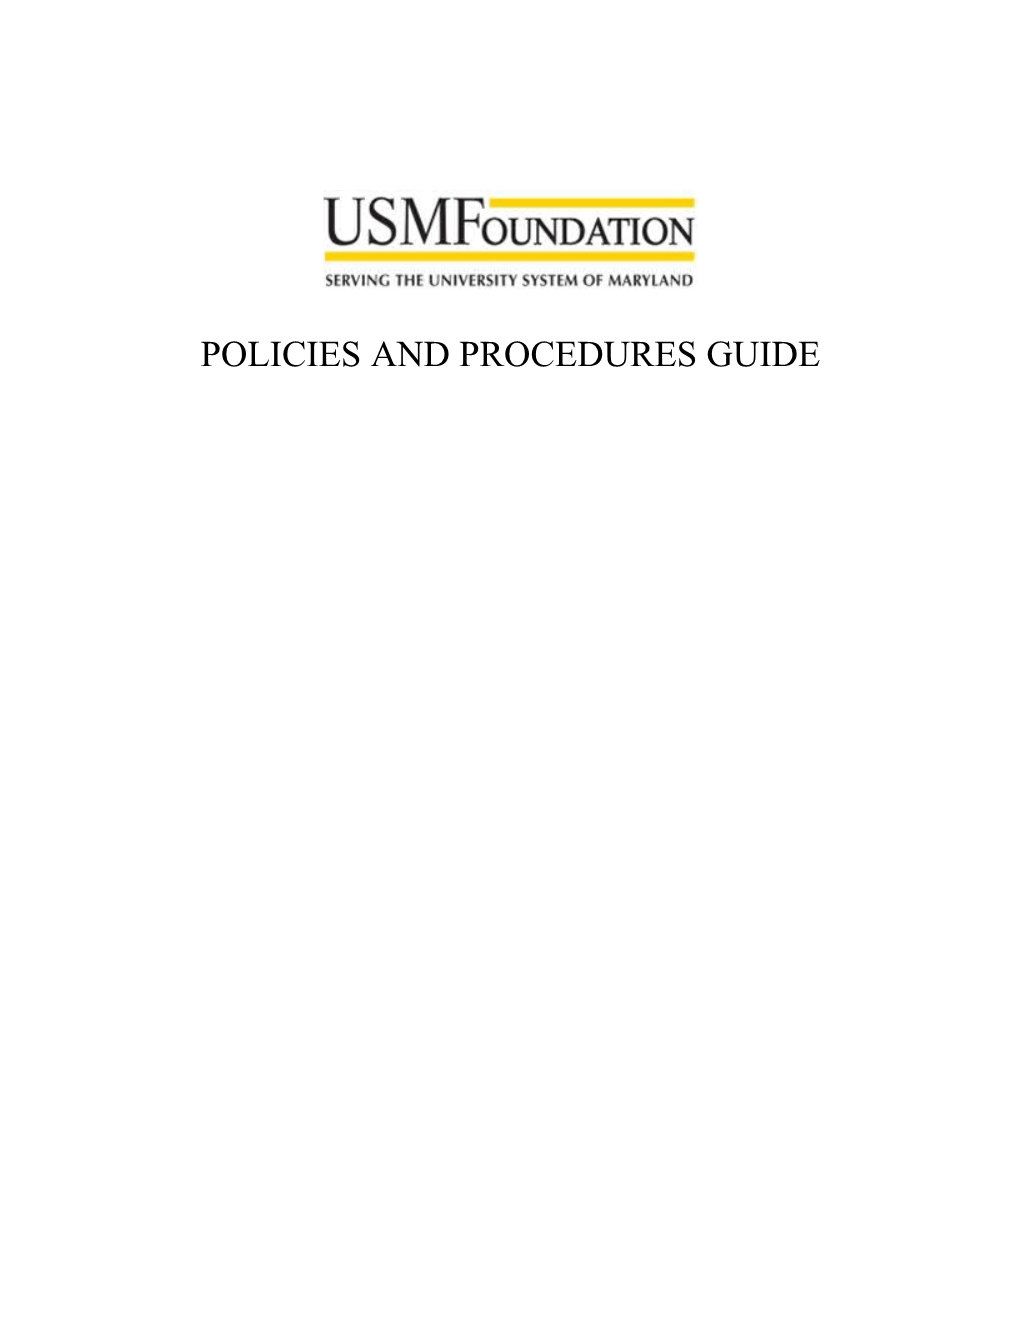 Policies and Procedures Guide